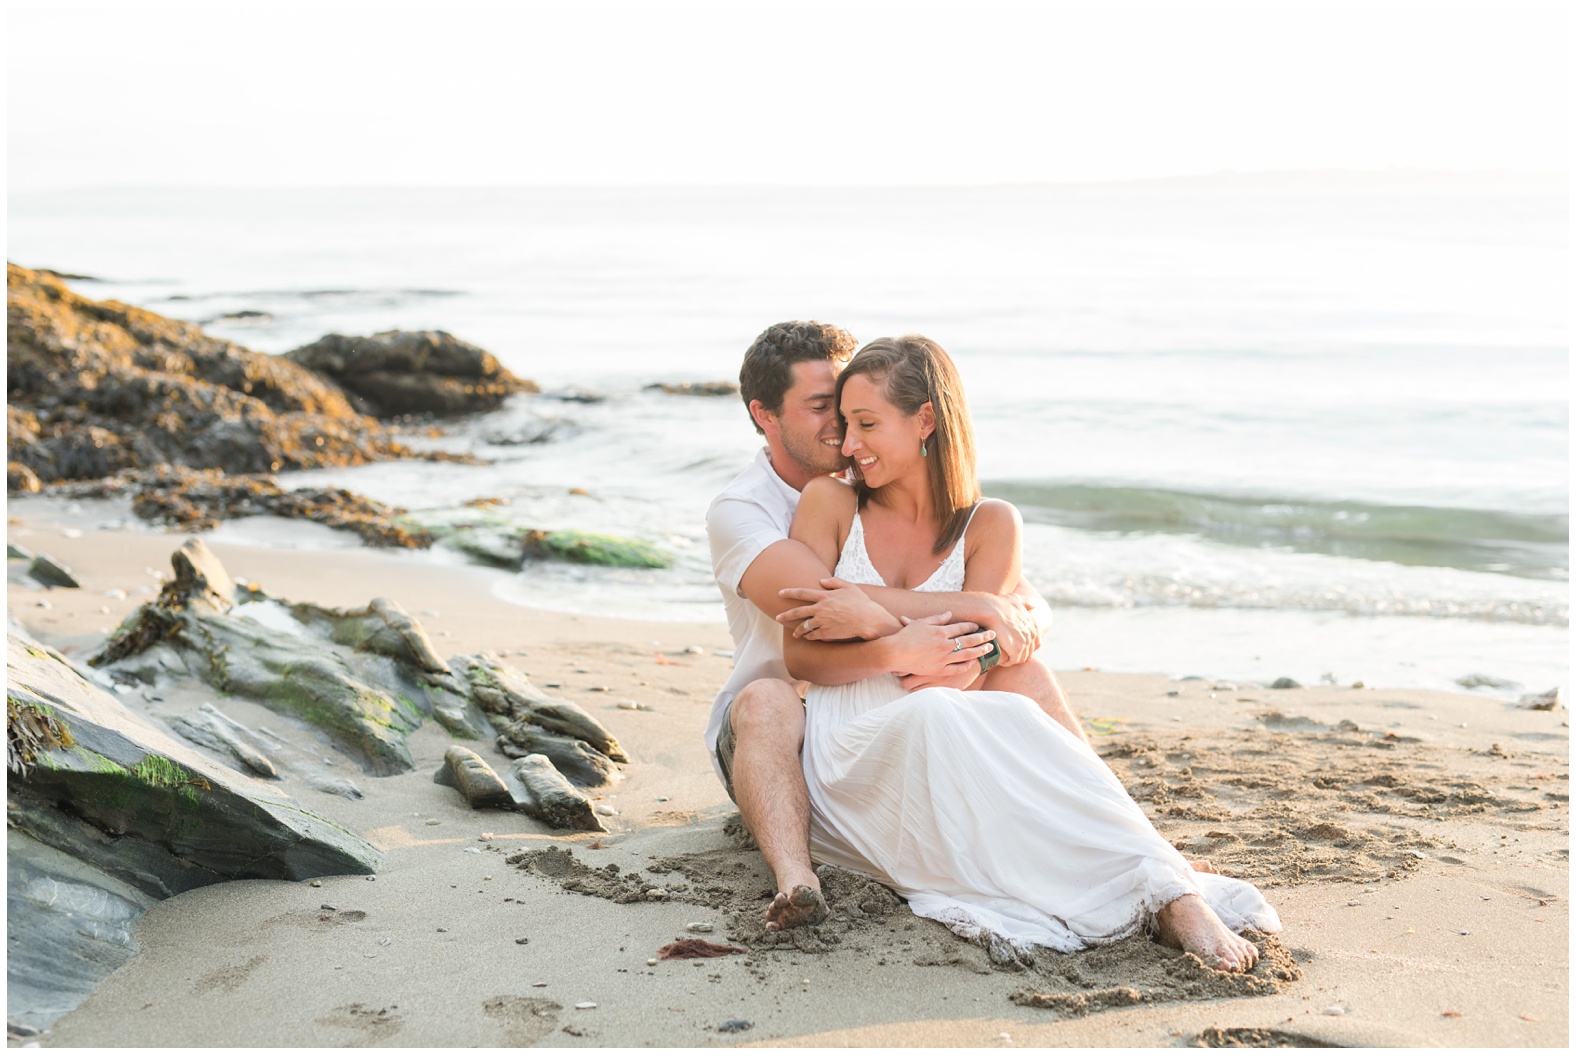 Holly + Nic: Beach Surf Engagement Session in Jamestown, Rhode Island ...